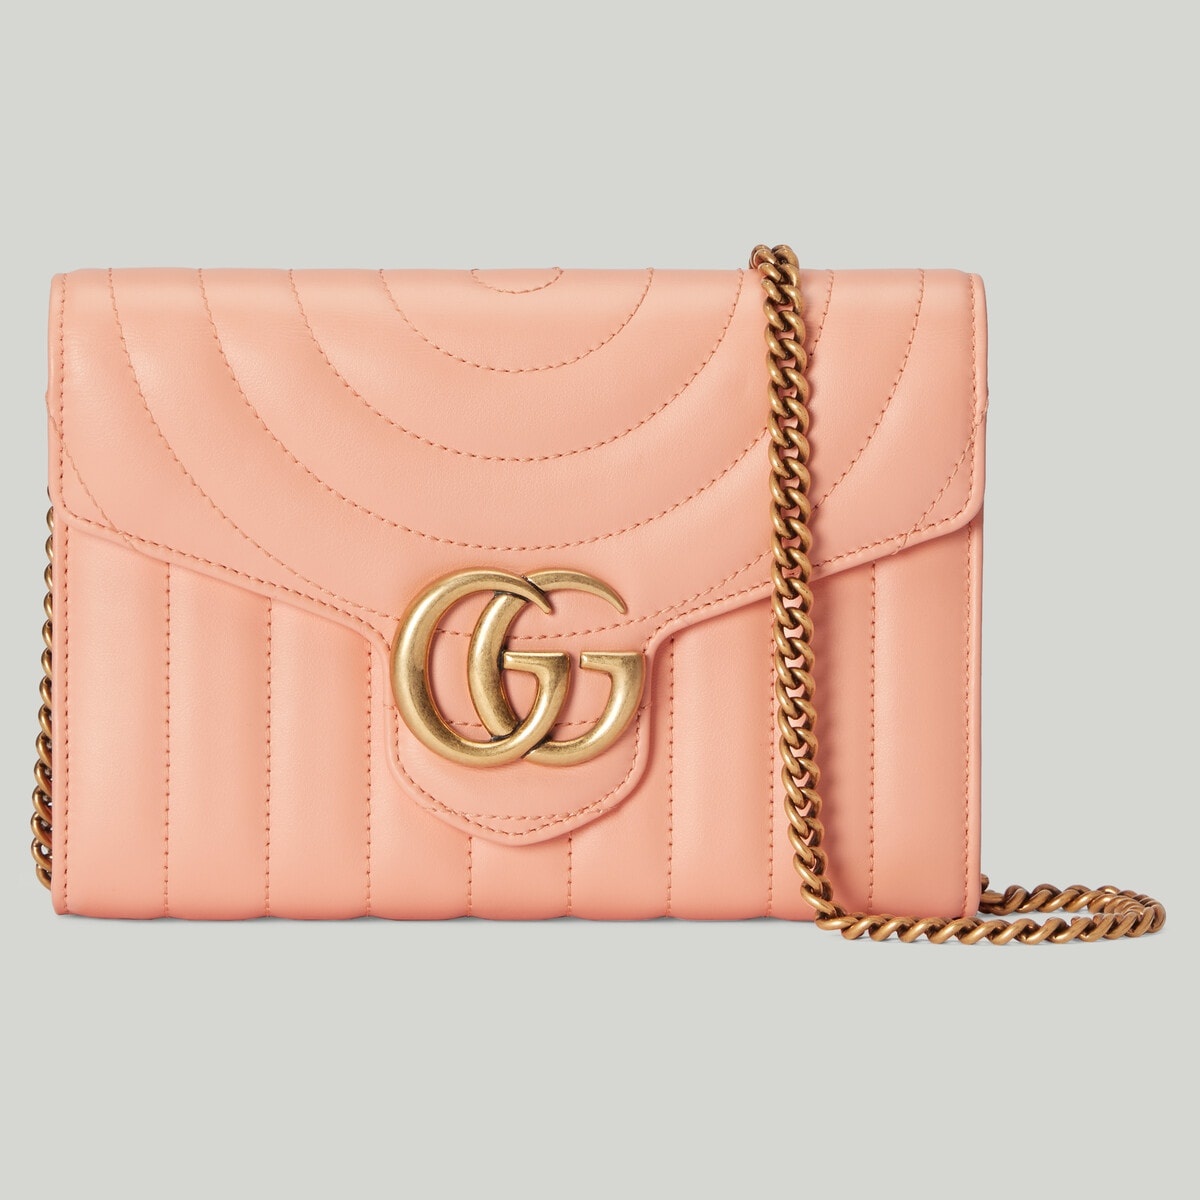 Gucci Horsebit 1955 crocodile wallet with chain in pink